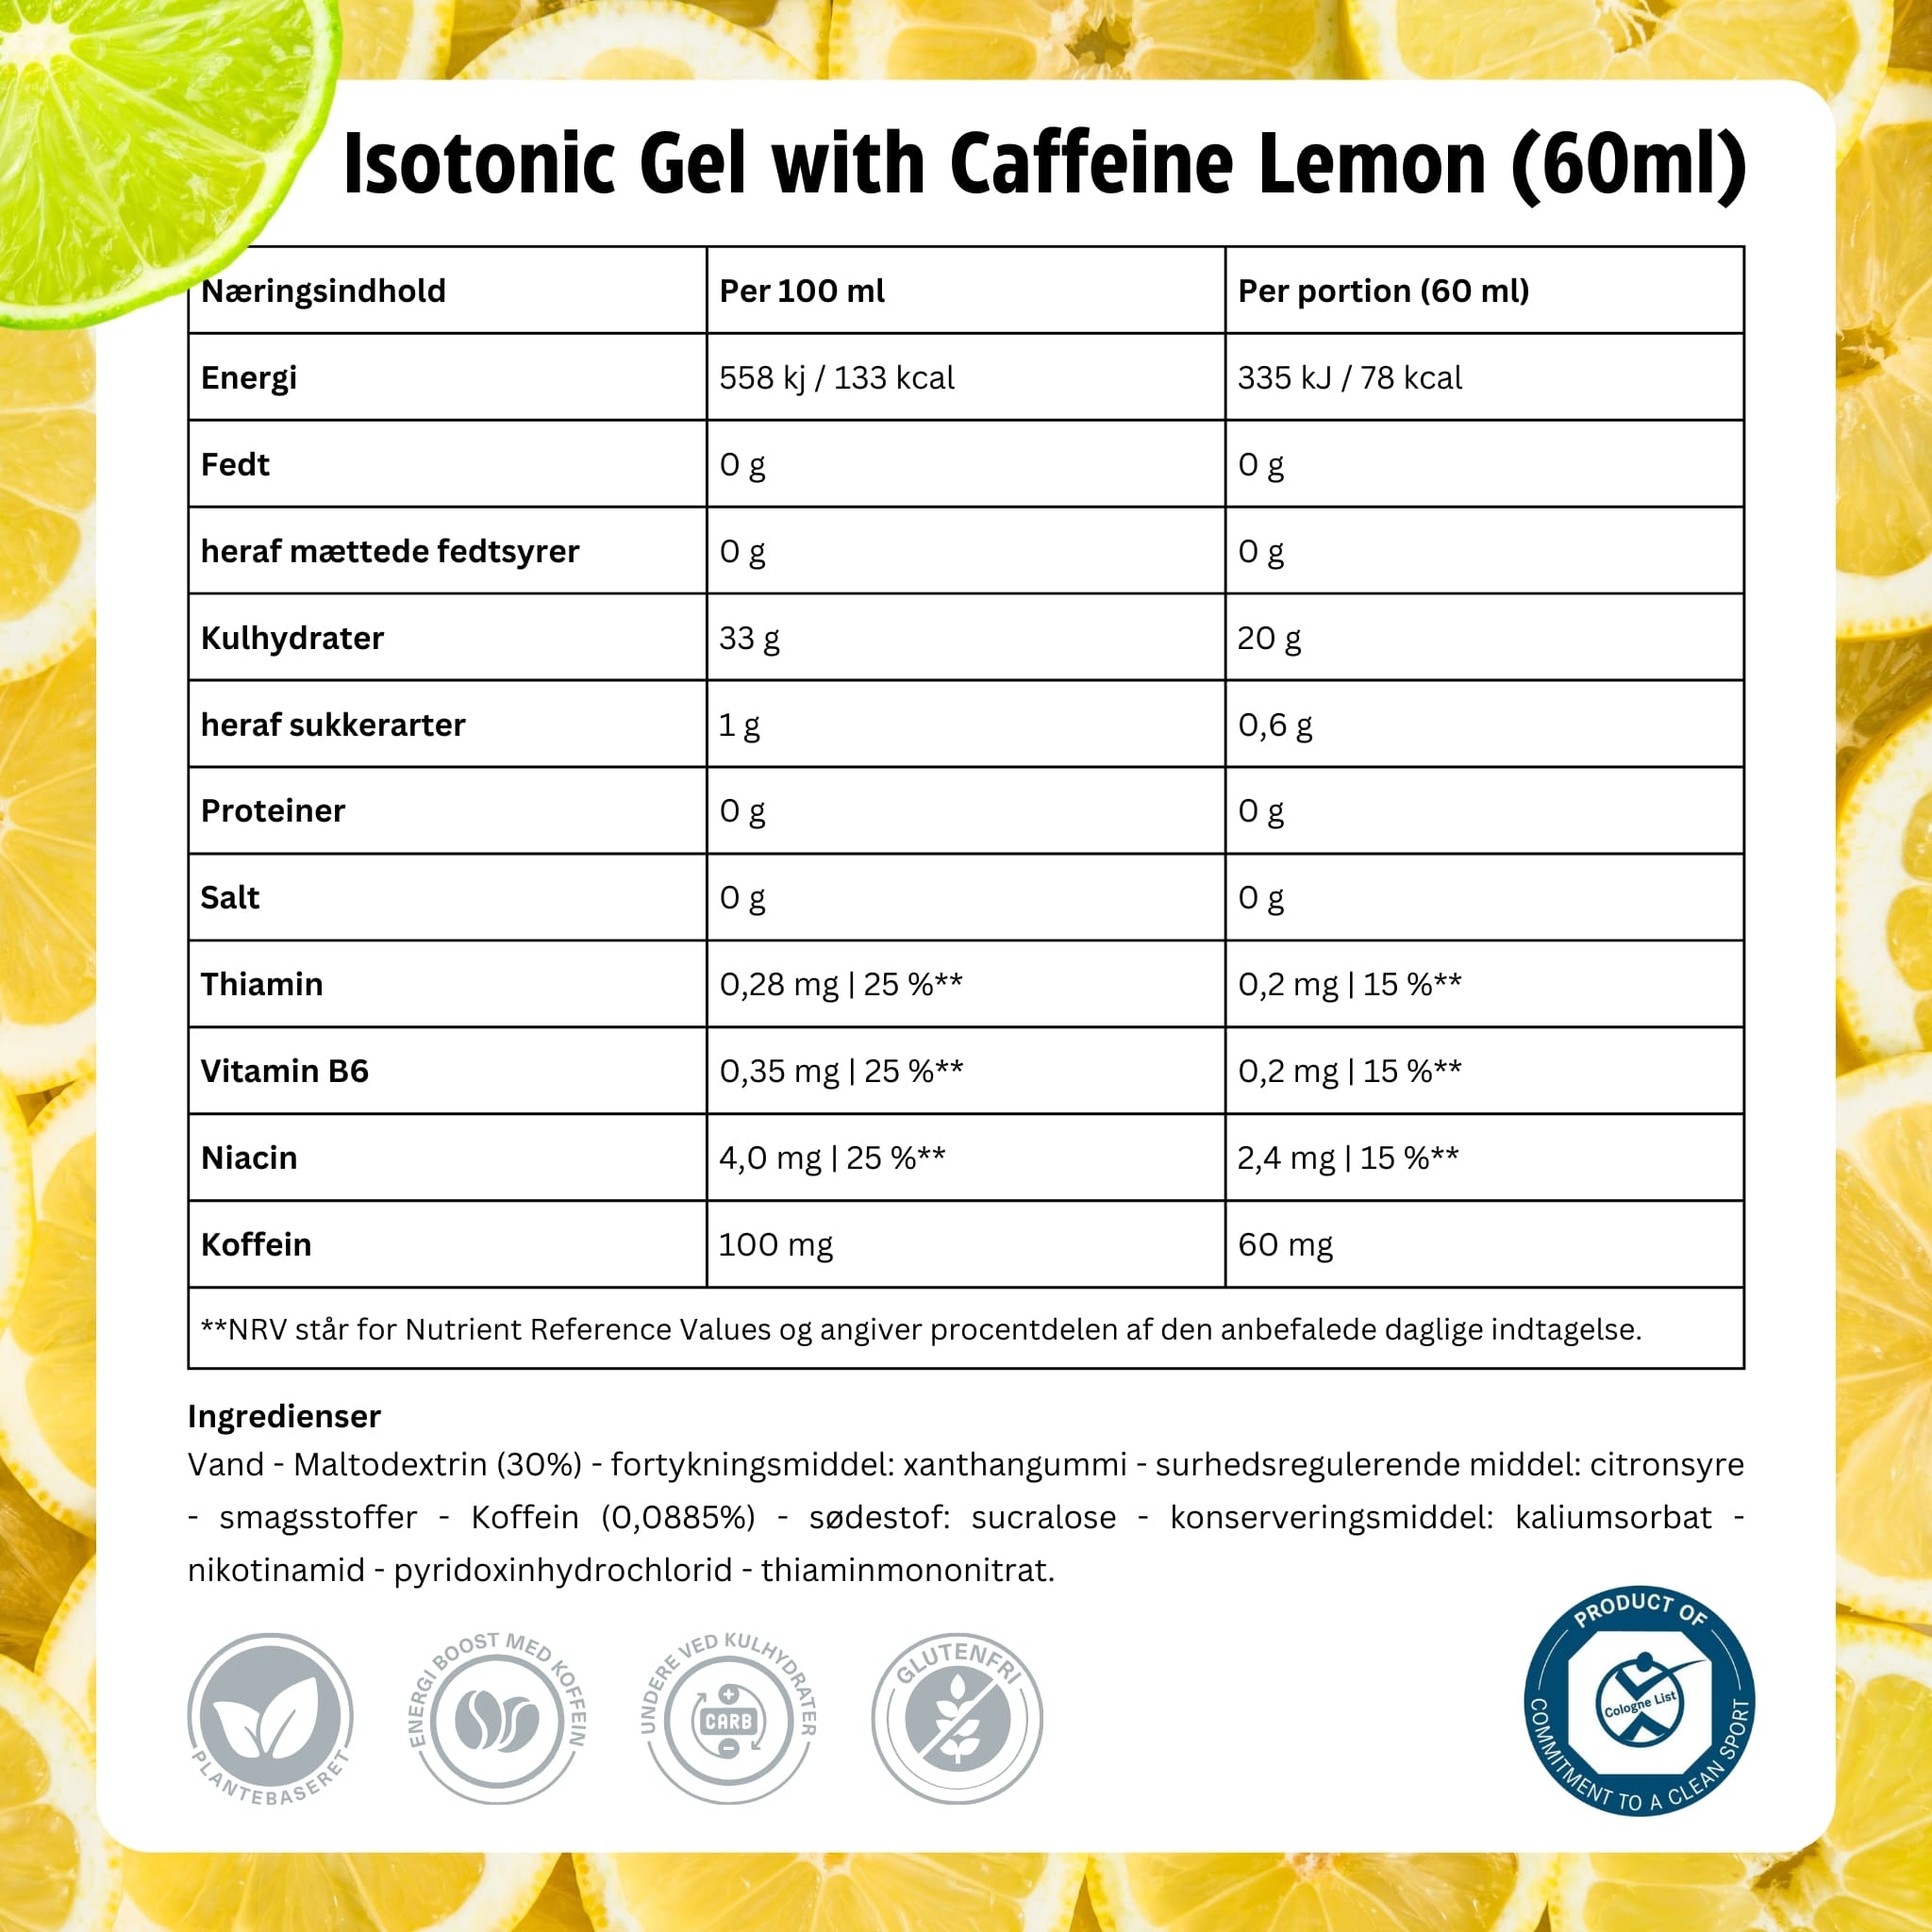 Isotonic Gel with Caffeine Lemon (60ml) - Ingredients Facts